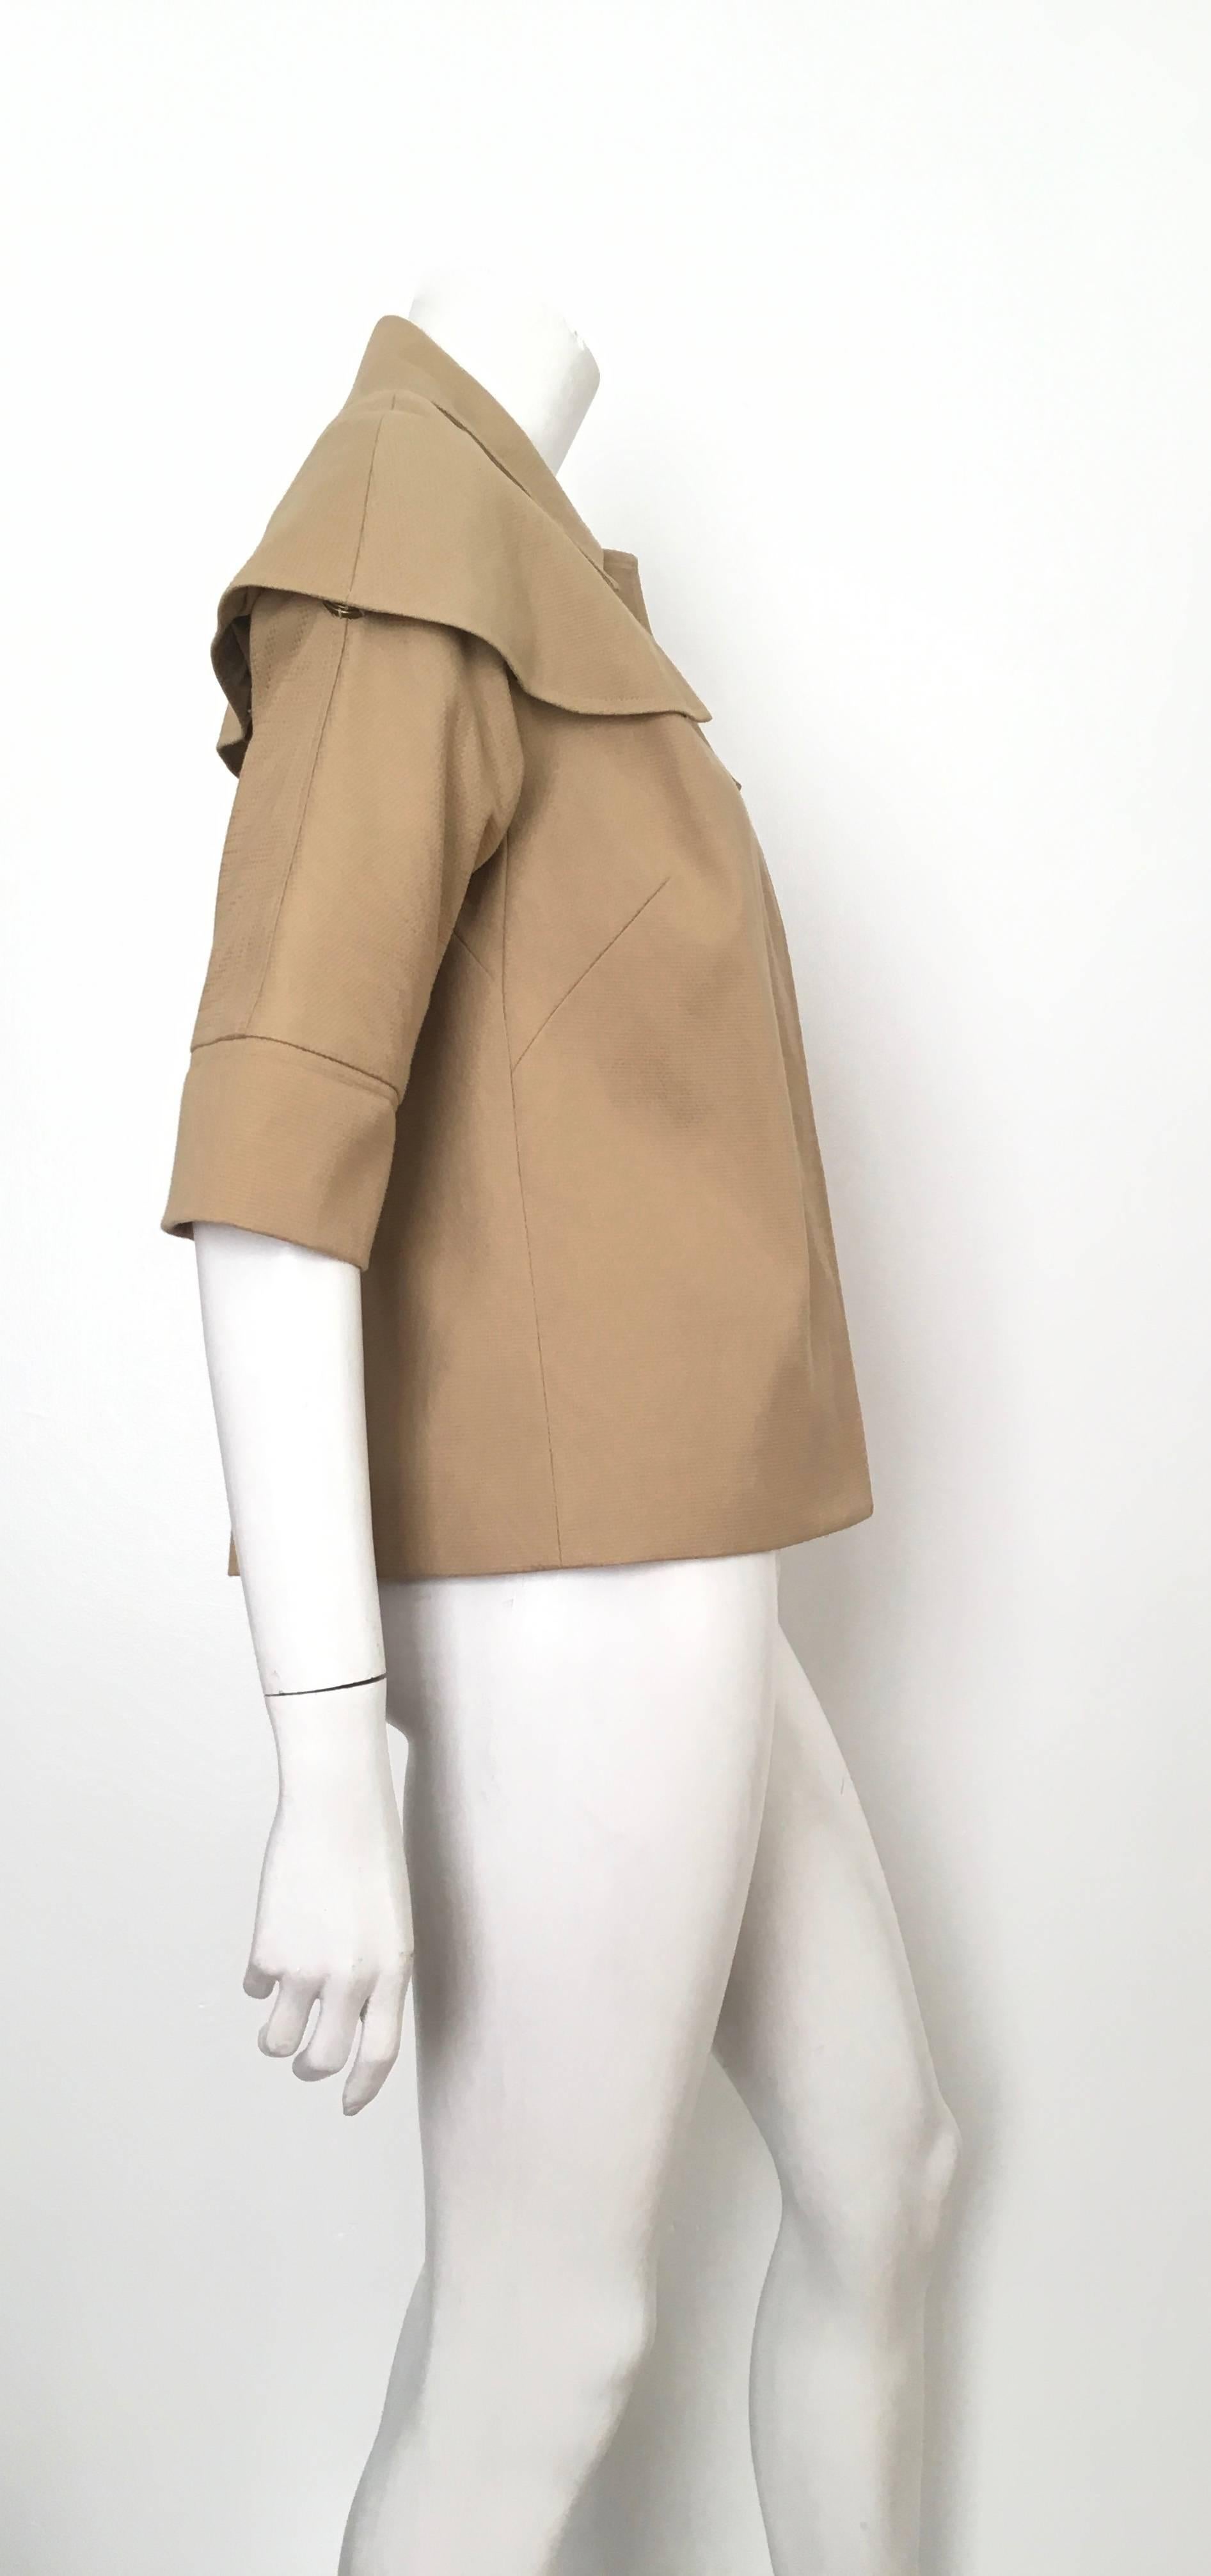 Brown Lela Rose Tan Caped Swing Jacket Size 4. Never Worn. For Sale